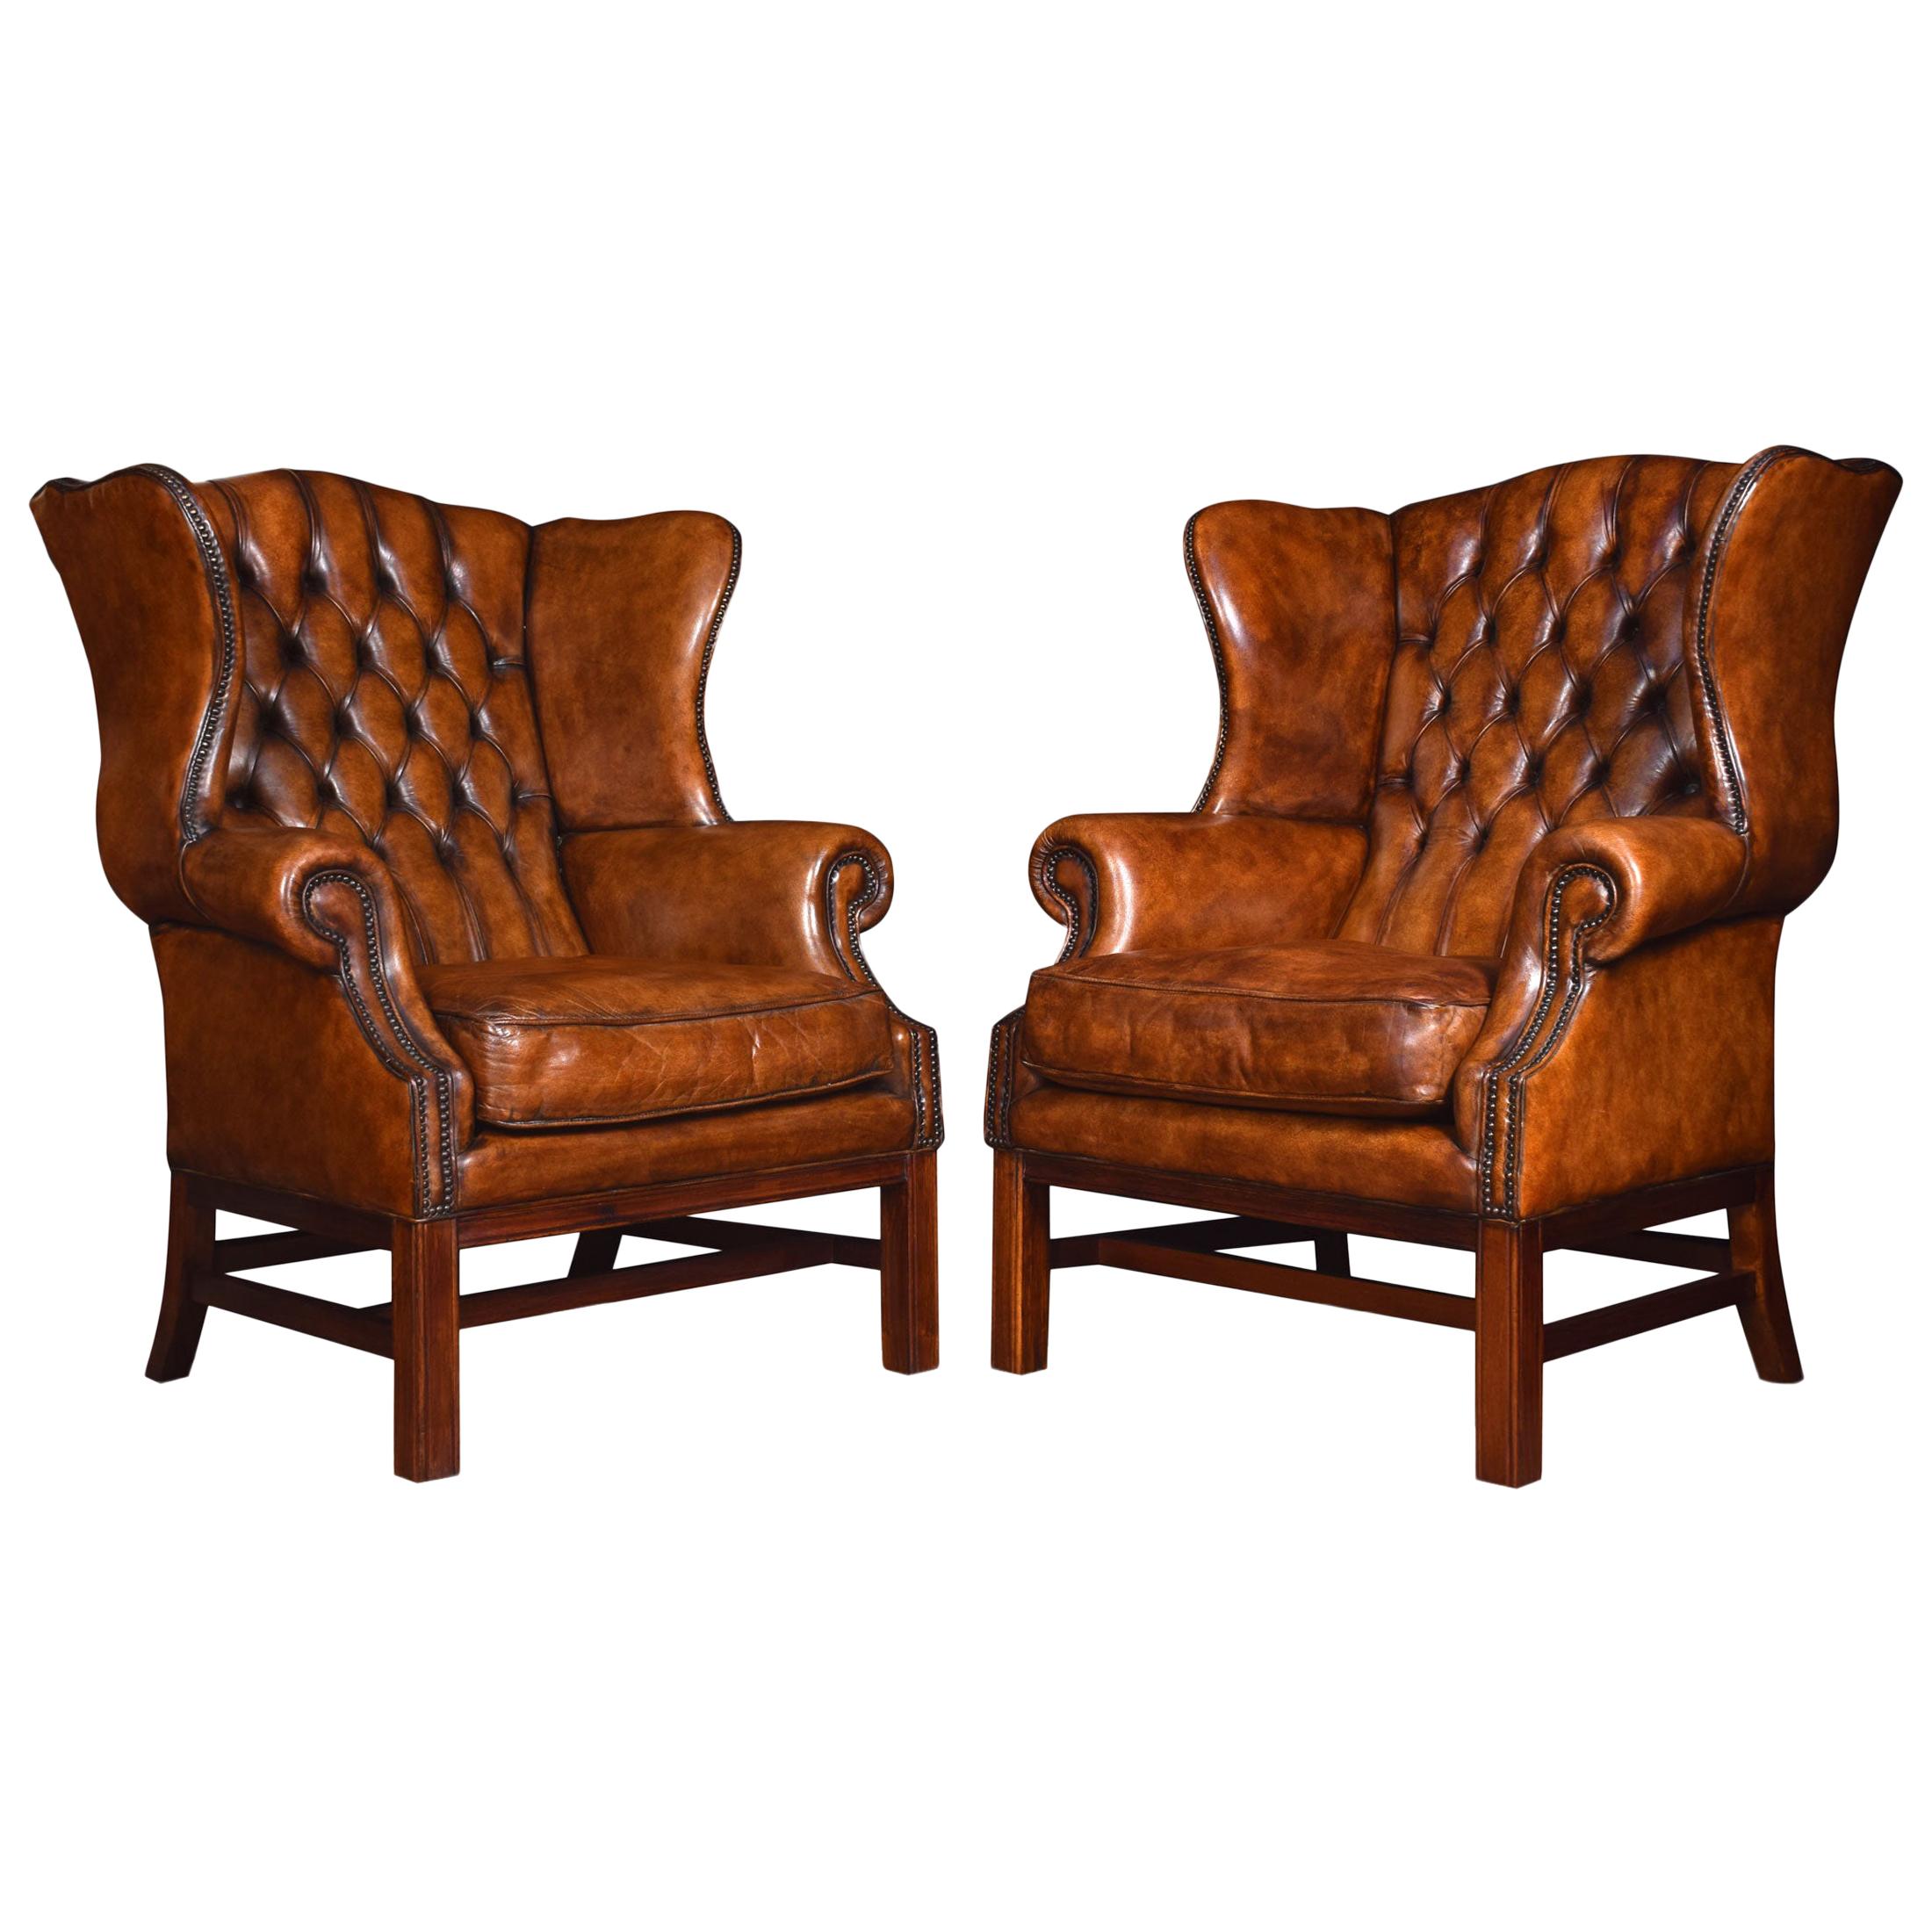 Pair of Leather Upholstered Wingback Armchairs